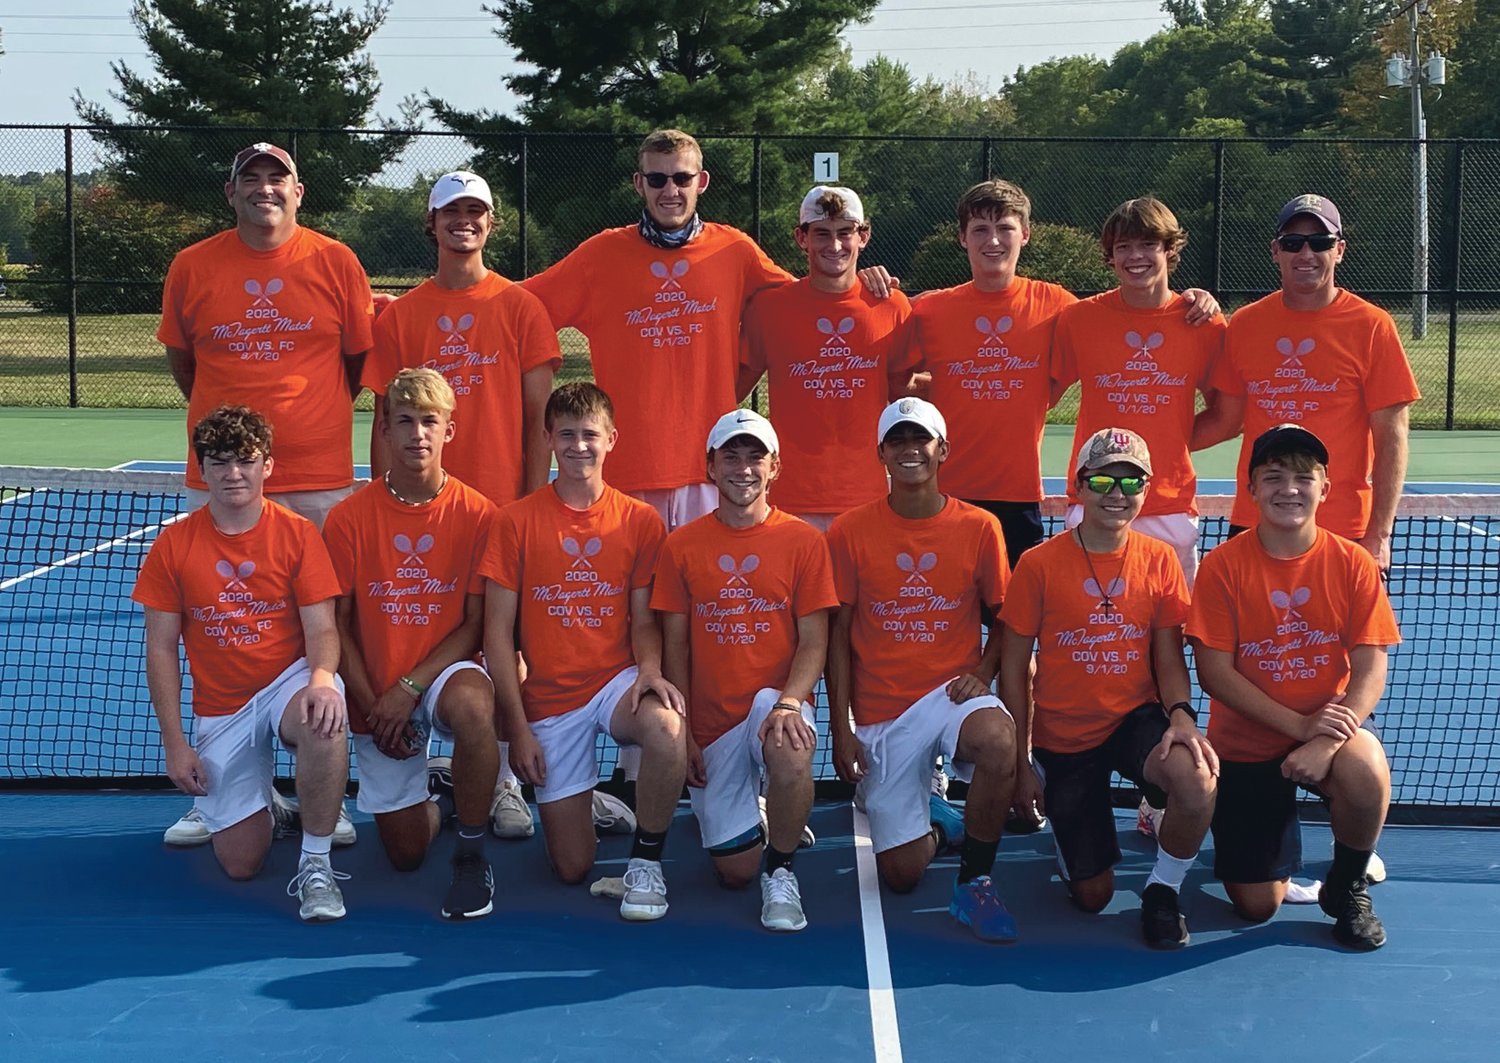 The Fountain Central boys' tennis team raised $2,370 for the Evan McTagertt Memorial Scholarship and the Levi McTagertt Trust Fund.